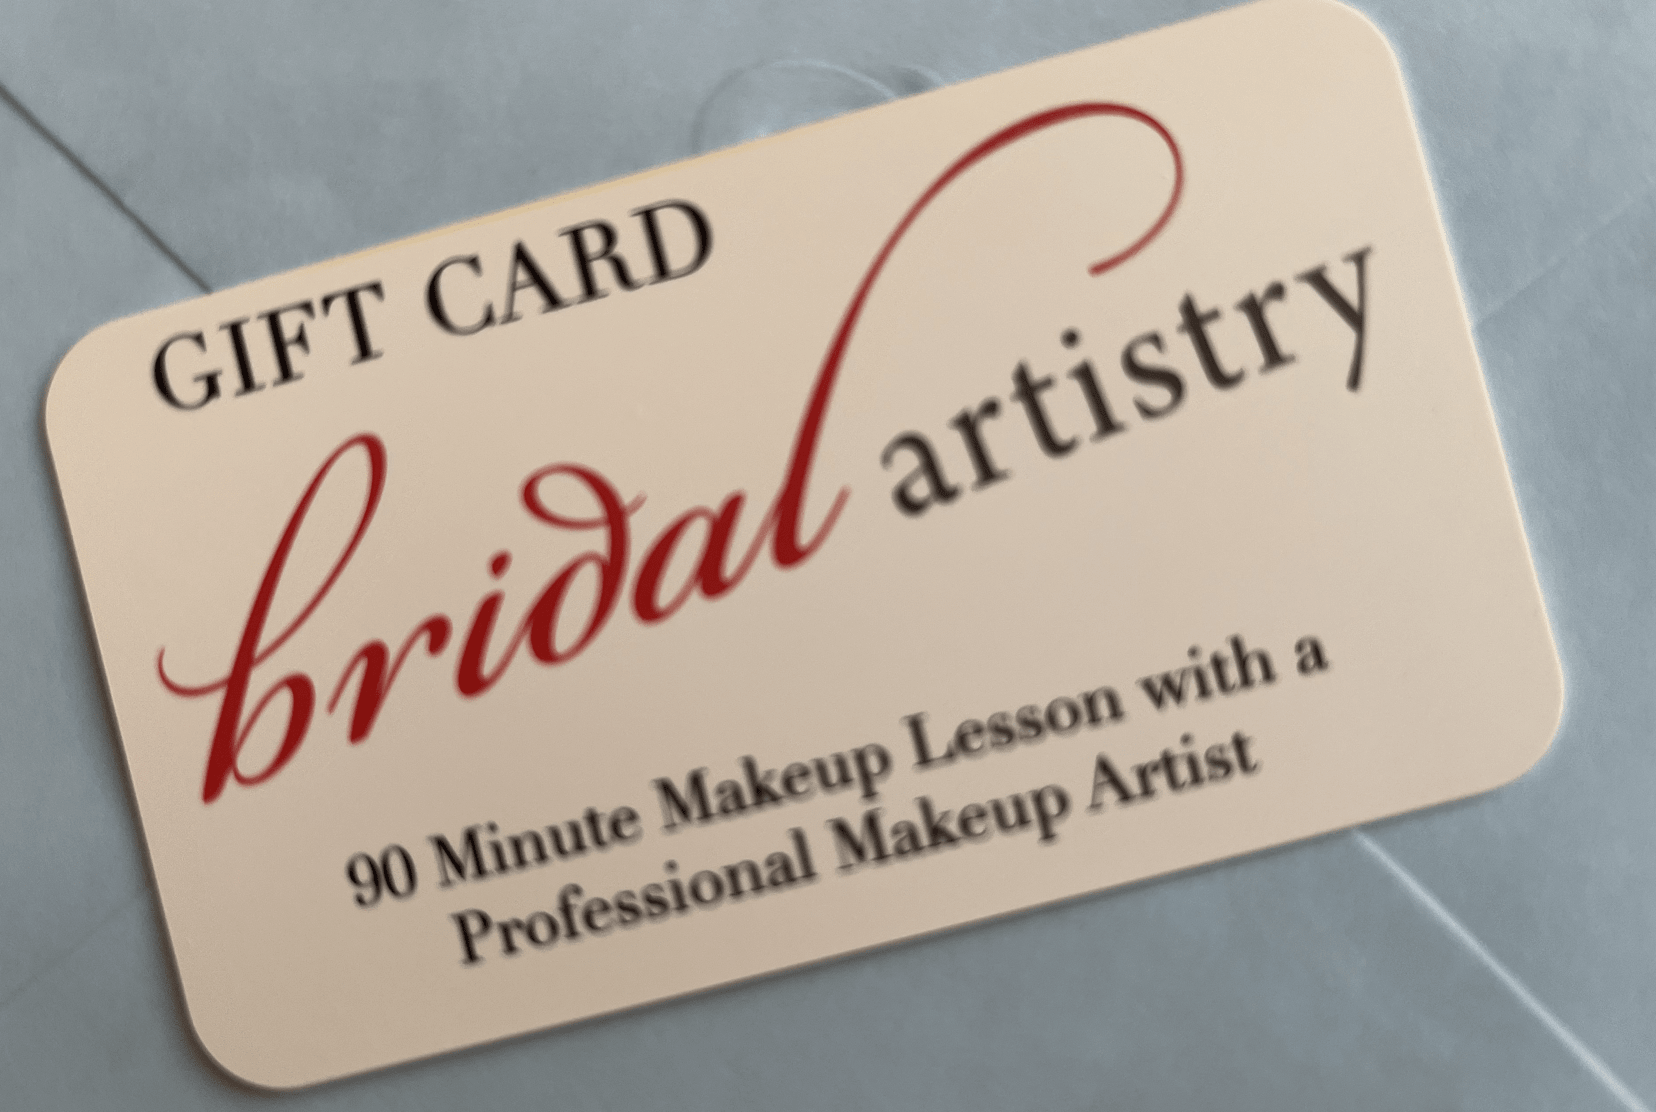 2 hour makeup lesson in studio with the owner of Bridal Artistry NC to sharpen your makeup skills and polish your own image.  